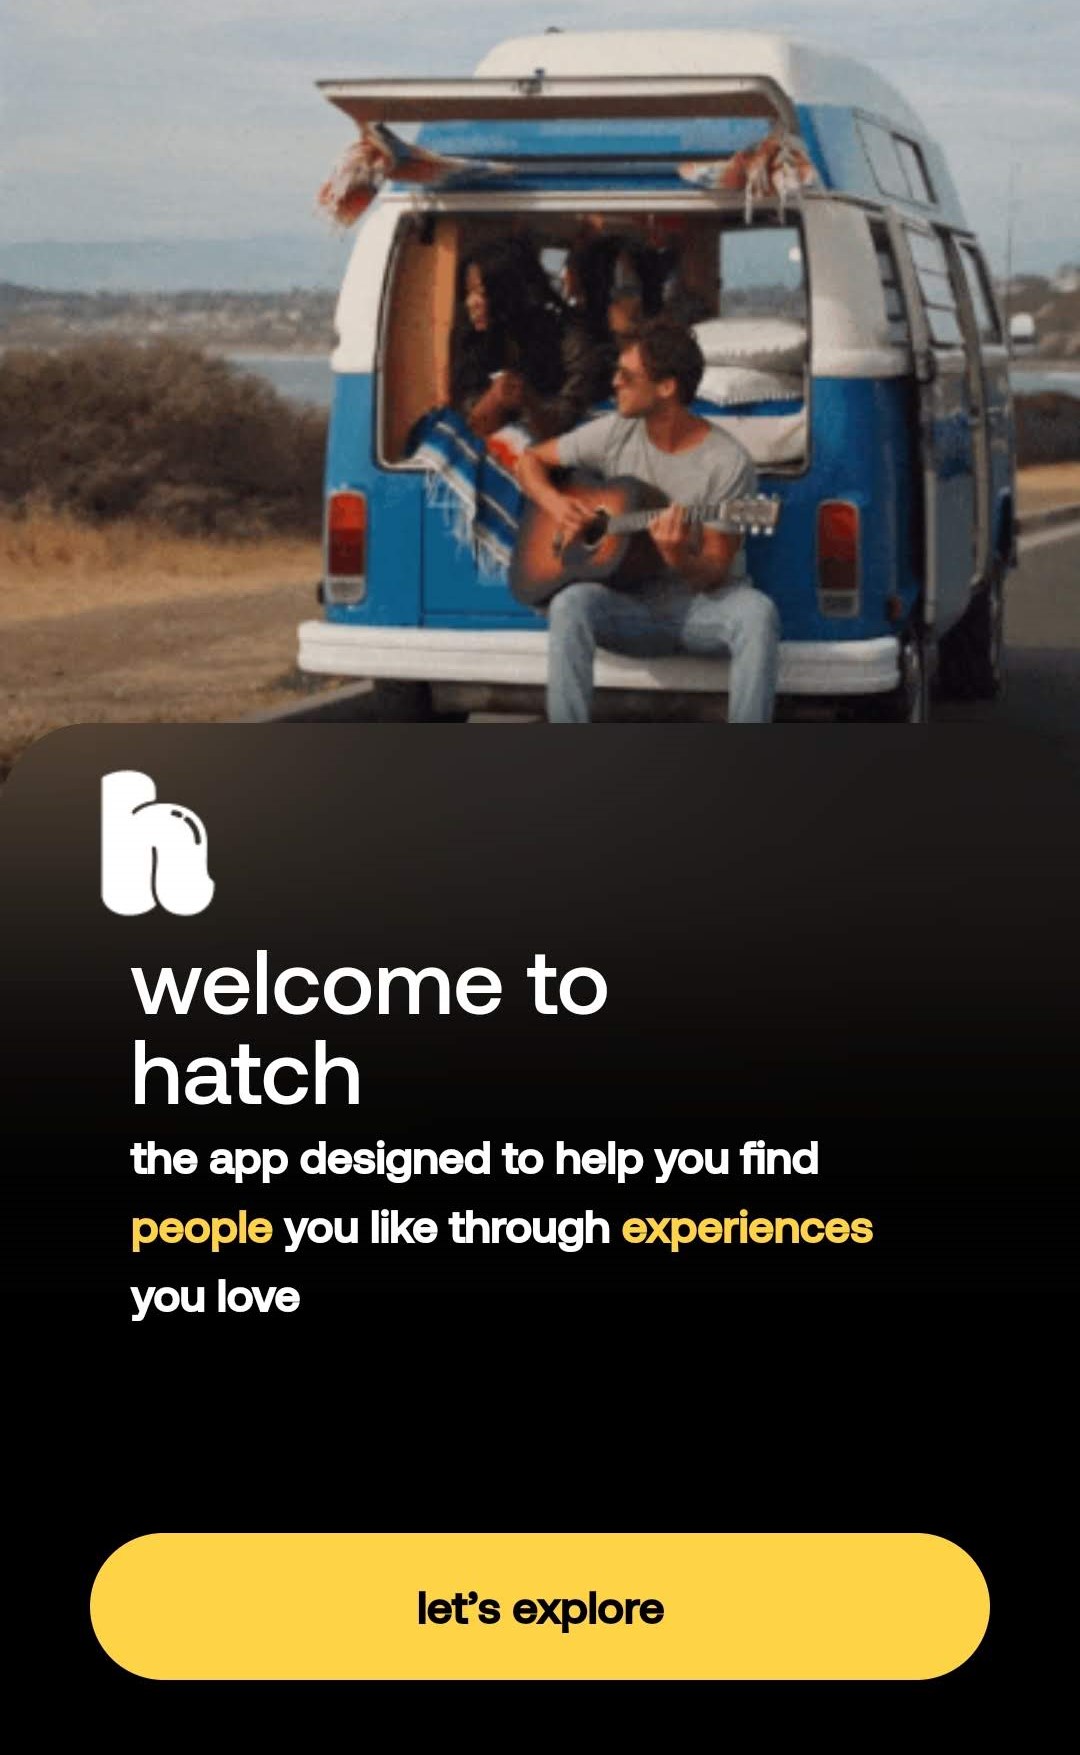 Hatch: South African social app connects people through experiences